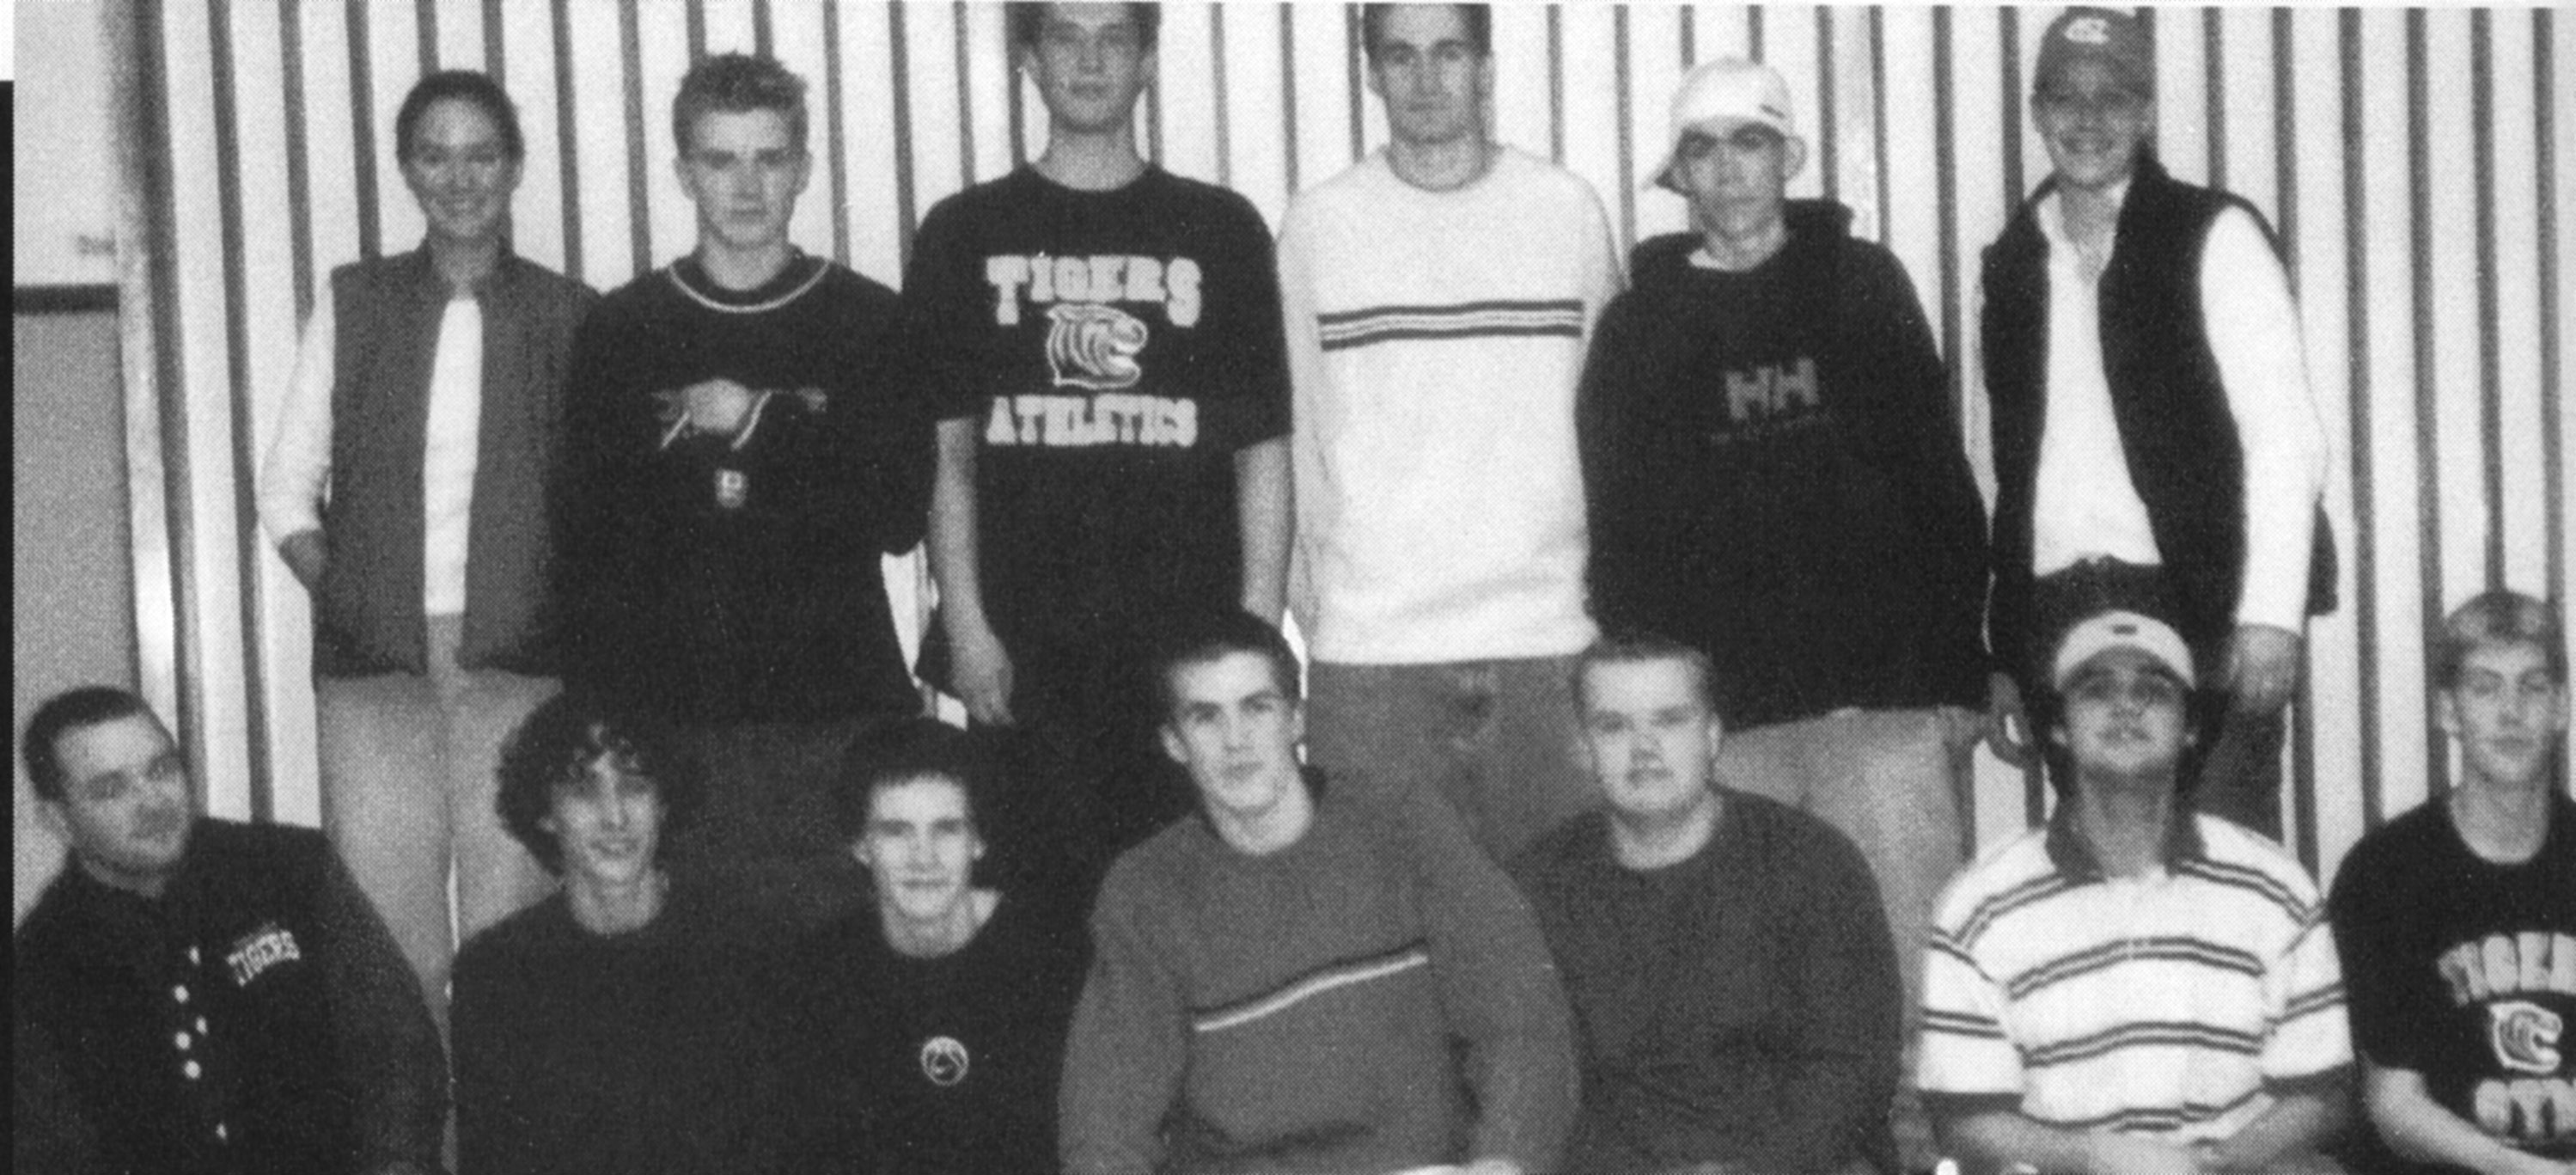 (Click to magnify - original photo out-of-focus and with heads cut off) FRONT ROW: Mr. C. Pinkerton, Blake Sedore, Holland Dillion, Jeff Keeping, Seb Pritchard, Rob Sedore, Bryon Kennedy; ***BACK ROW: Heather Harris, Alex Arnold, Colin Emo, Jeff Millam, S